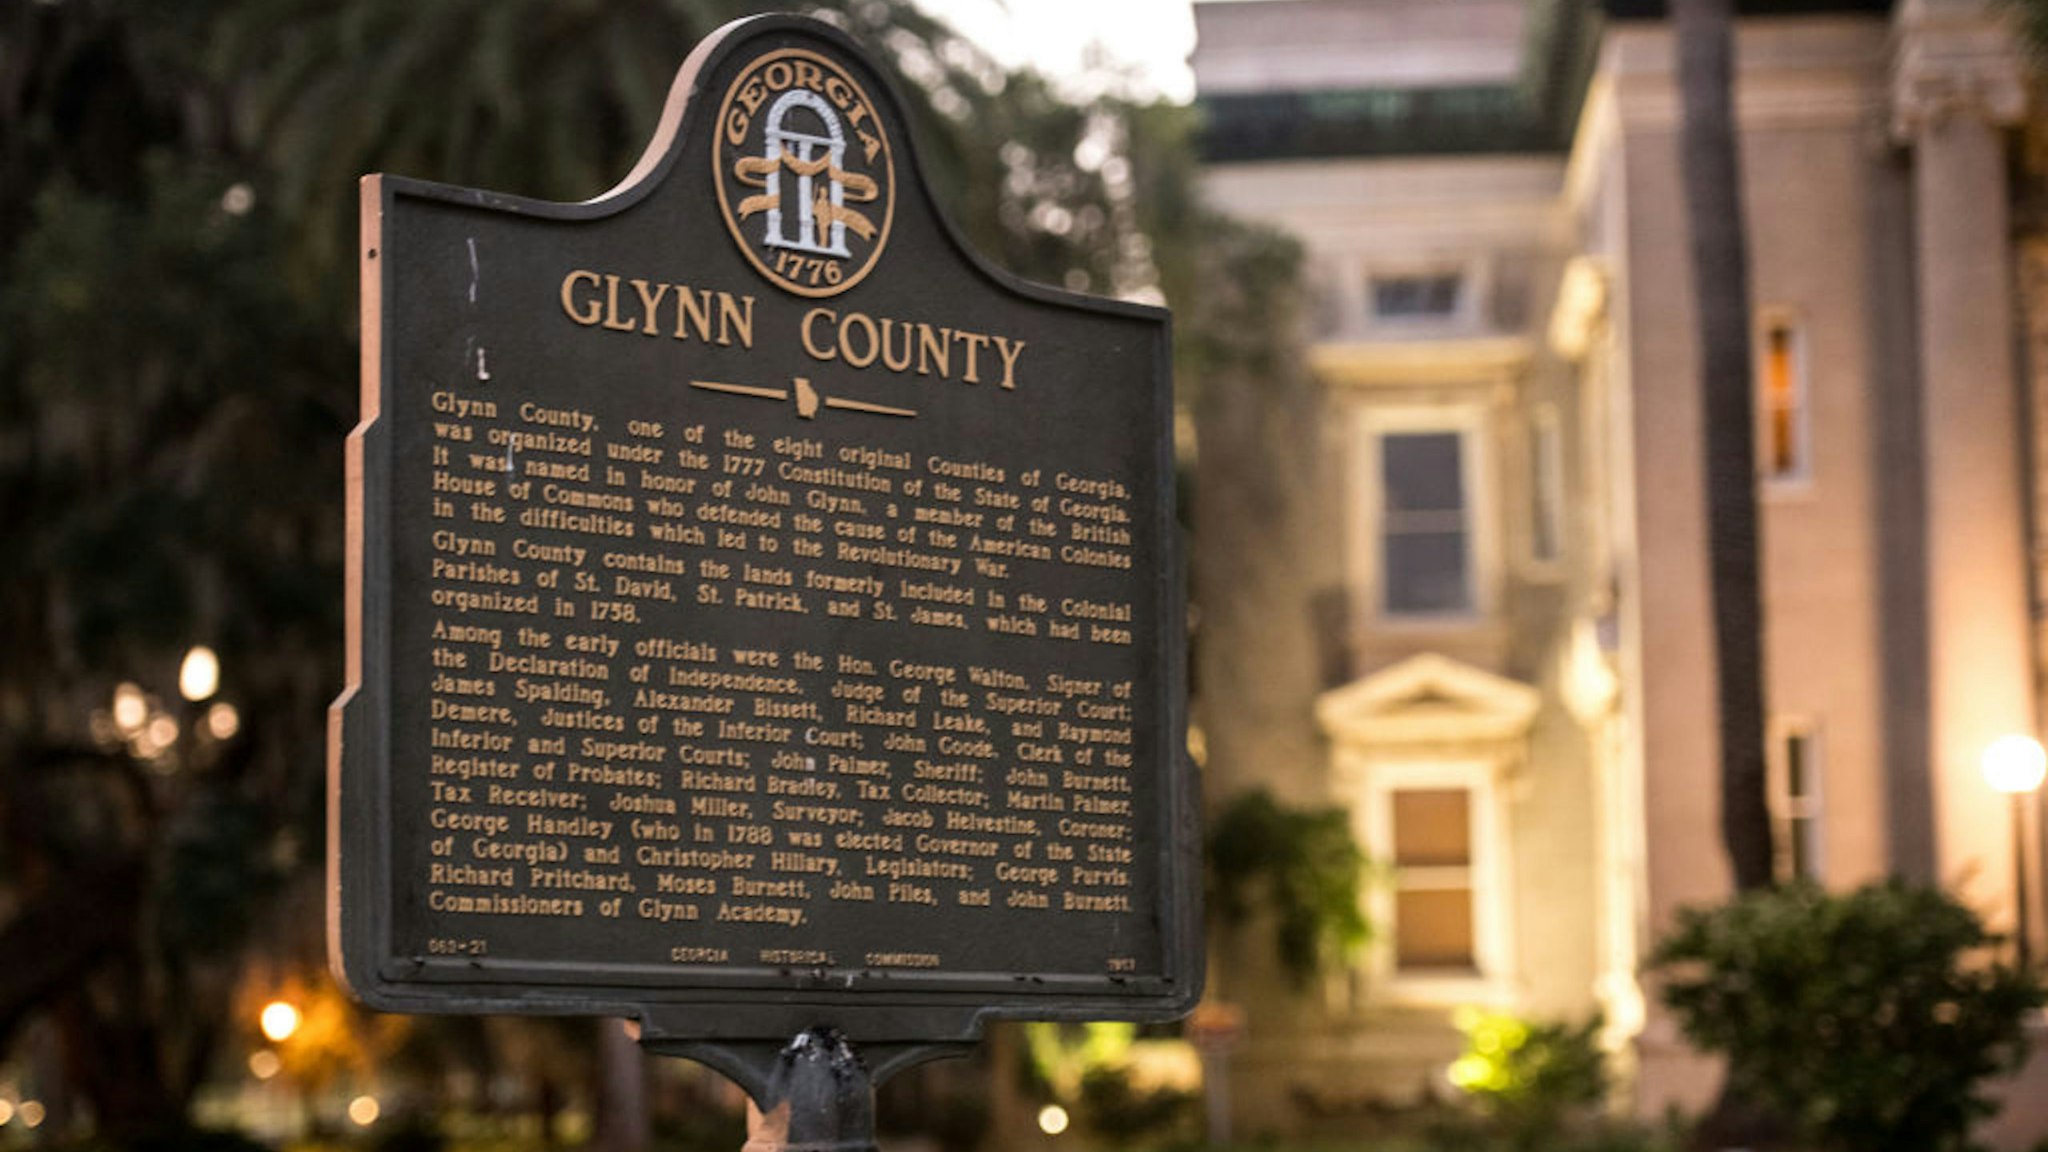 BRUNSWICK, GA - MAY 06: A marker stands in front of the historic Glynn County courthouse May 6, 2020 in Brunswick, Georgia. Authorities are facing scrutiny over a recently released video that appears to show 25-year-old Ahmaud Arbery being gunned down while jogging during a confrontation with an armed father and son on February 23.